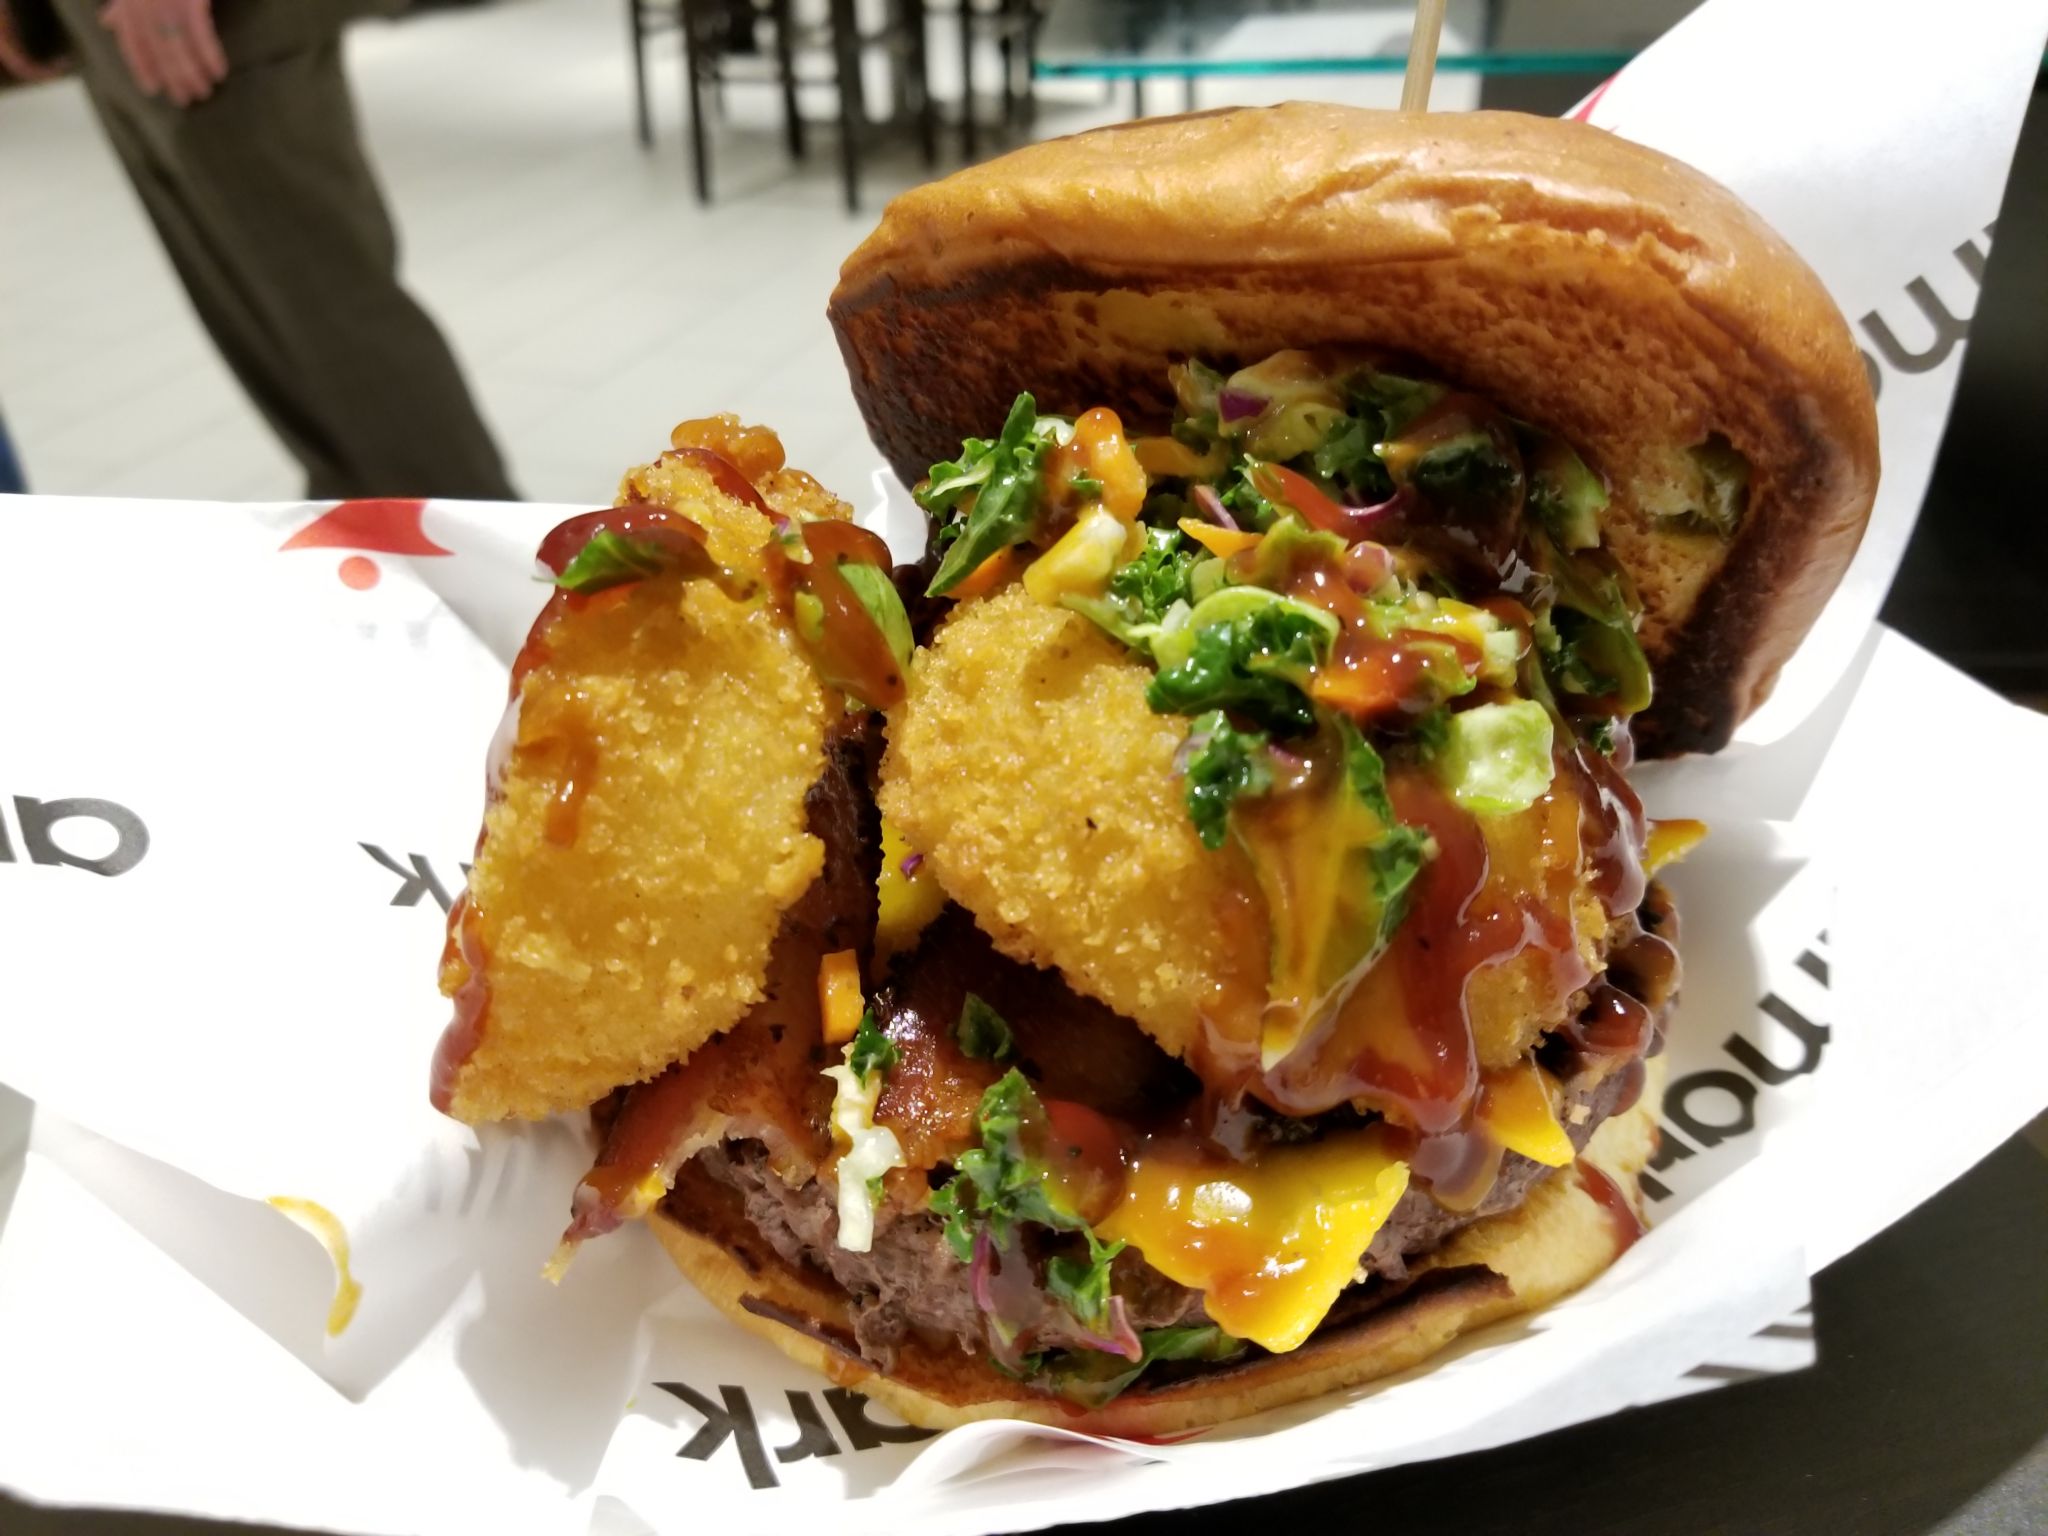 All the new food at Minute Maid Park this season